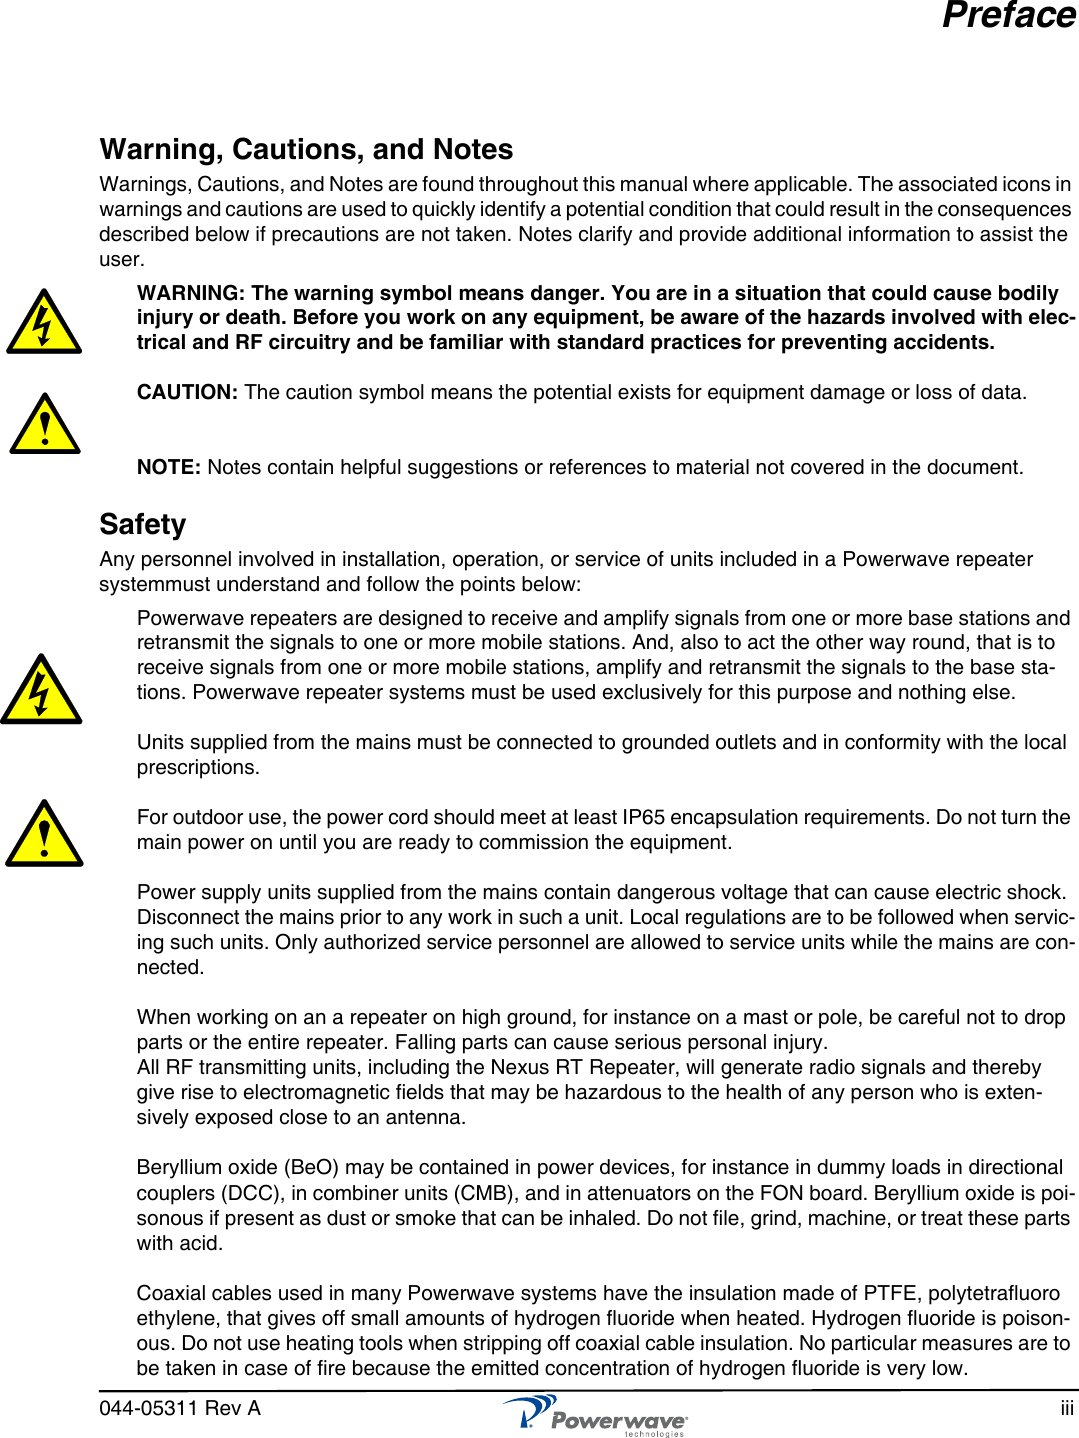 044-05311 Rev A iiiPrefaceWarning, Cautions, and NotesWarnings, Cautions, and Notes are found throughout this manual where applicable. The associated icons in warnings and cautions are used to quickly identify a potential condition that could result in the consequences described below if precautions are not taken. Notes clarify and provide additional information to assist the user.WARNING: The warning symbol means danger. You are in a situation that could cause bodily injury or death. Before you work on any equipment, be aware of the hazards involved with elec-trical and RF circuitry and be familiar with standard practices for preventing accidents. CAUTION: The caution symbol means the potential exists for equipment damage or loss of data.   NOTE: Notes contain helpful suggestions or references to material not covered in the document.SafetyAny personnel involved in installation, operation, or service of units included in a Powerwave repeater systemmust understand and follow the points below:Powerwave repeaters are designed to receive and amplify signals from one or more base stations and retransmit the signals to one or more mobile stations. And, also to act the other way round, that is to receive signals from one or more mobile stations, amplify and retransmit the signals to the base sta-tions. Powerwave repeater systems must be used exclusively for this purpose and nothing else.Units supplied from the mains must be connected to grounded outlets and in conformity with the local prescriptions. For outdoor use, the power cord should meet at least IP65 encapsulation requirements. Do not turn the main power on until you are ready to commission the equipment.Power supply units supplied from the mains contain dangerous voltage that can cause electric shock. Disconnect the mains prior to any work in such a unit. Local regulations are to be followed when servic-ing such units. Only authorized service personnel are allowed to service units while the mains are con-nected.When working on an a repeater on high ground, for instance on a mast or pole, be careful not to drop parts or the entire repeater. Falling parts can cause serious personal injury.All RF transmitting units, including the Nexus RT Repeater, will generate radio signals and thereby give rise to electromagnetic fields that may be hazardous to the health of any person who is exten-sively exposed close to an antenna. Beryllium oxide (BeO) may be contained in power devices, for instance in dummy loads in directional couplers (DCC), in combiner units (CMB), and in attenuators on the FON board. Beryllium oxide is poi-sonous if present as dust or smoke that can be inhaled. Do not file, grind, machine, or treat these parts with acid.Coaxial cables used in many Powerwave systems have the insulation made of PTFE, polytetrafluoro ethylene, that gives off small amounts of hydrogen fluoride when heated. Hydrogen fluoride is poison-ous. Do not use heating tools when stripping off coaxial cable insulation. No particular measures are to be taken in case of fire because the emitted concentration of hydrogen fluoride is very low.